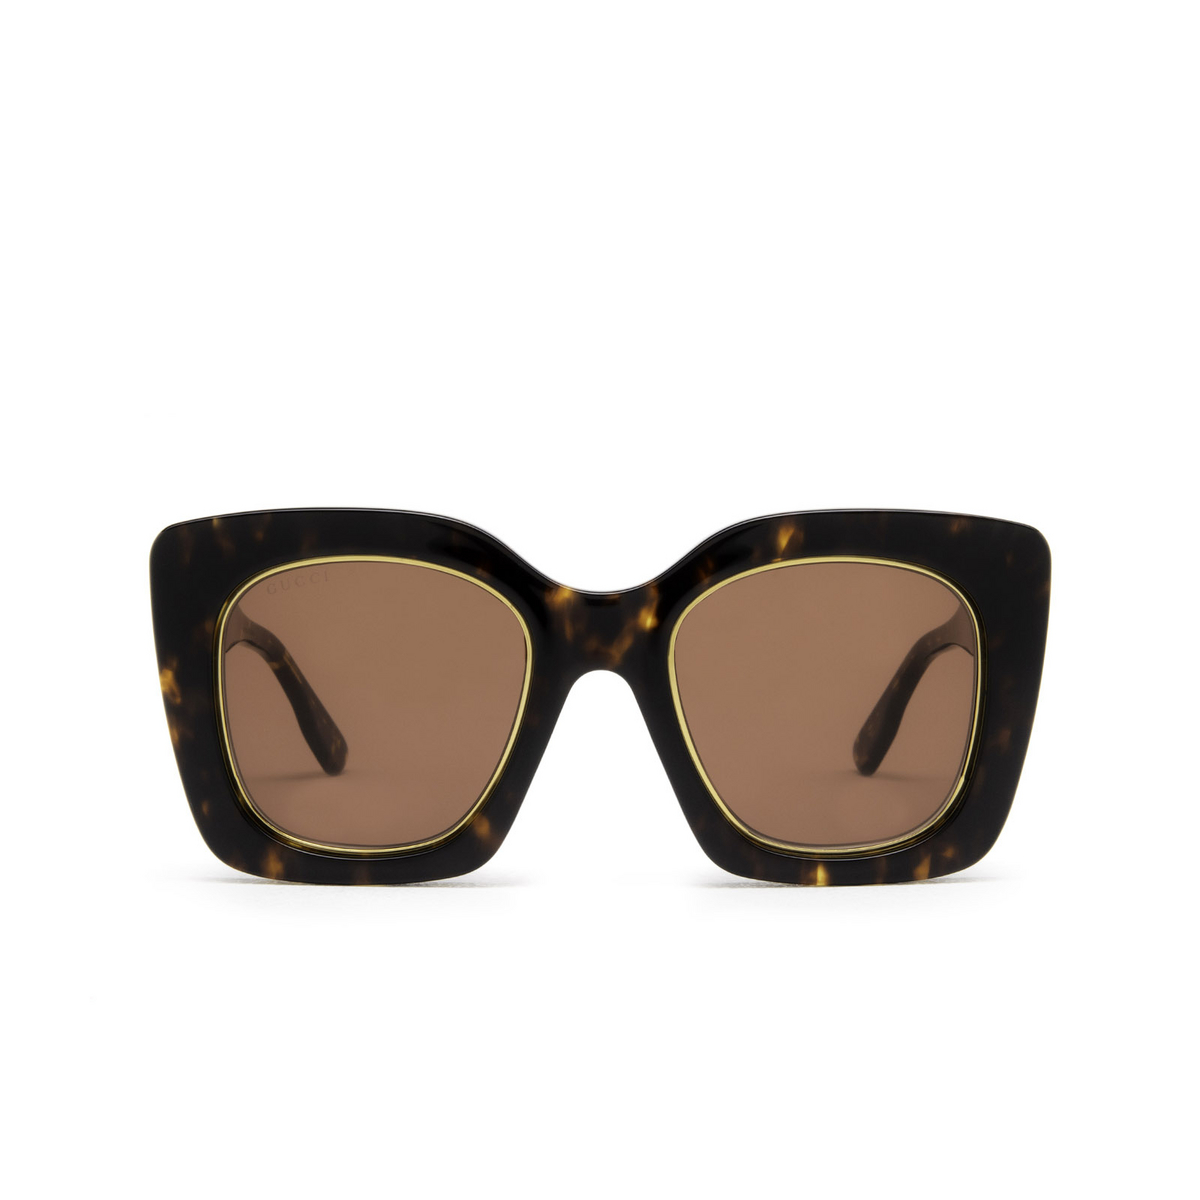 Gucci® Butterfly Sunglasses: GG1151S color Havana 003 - front view.